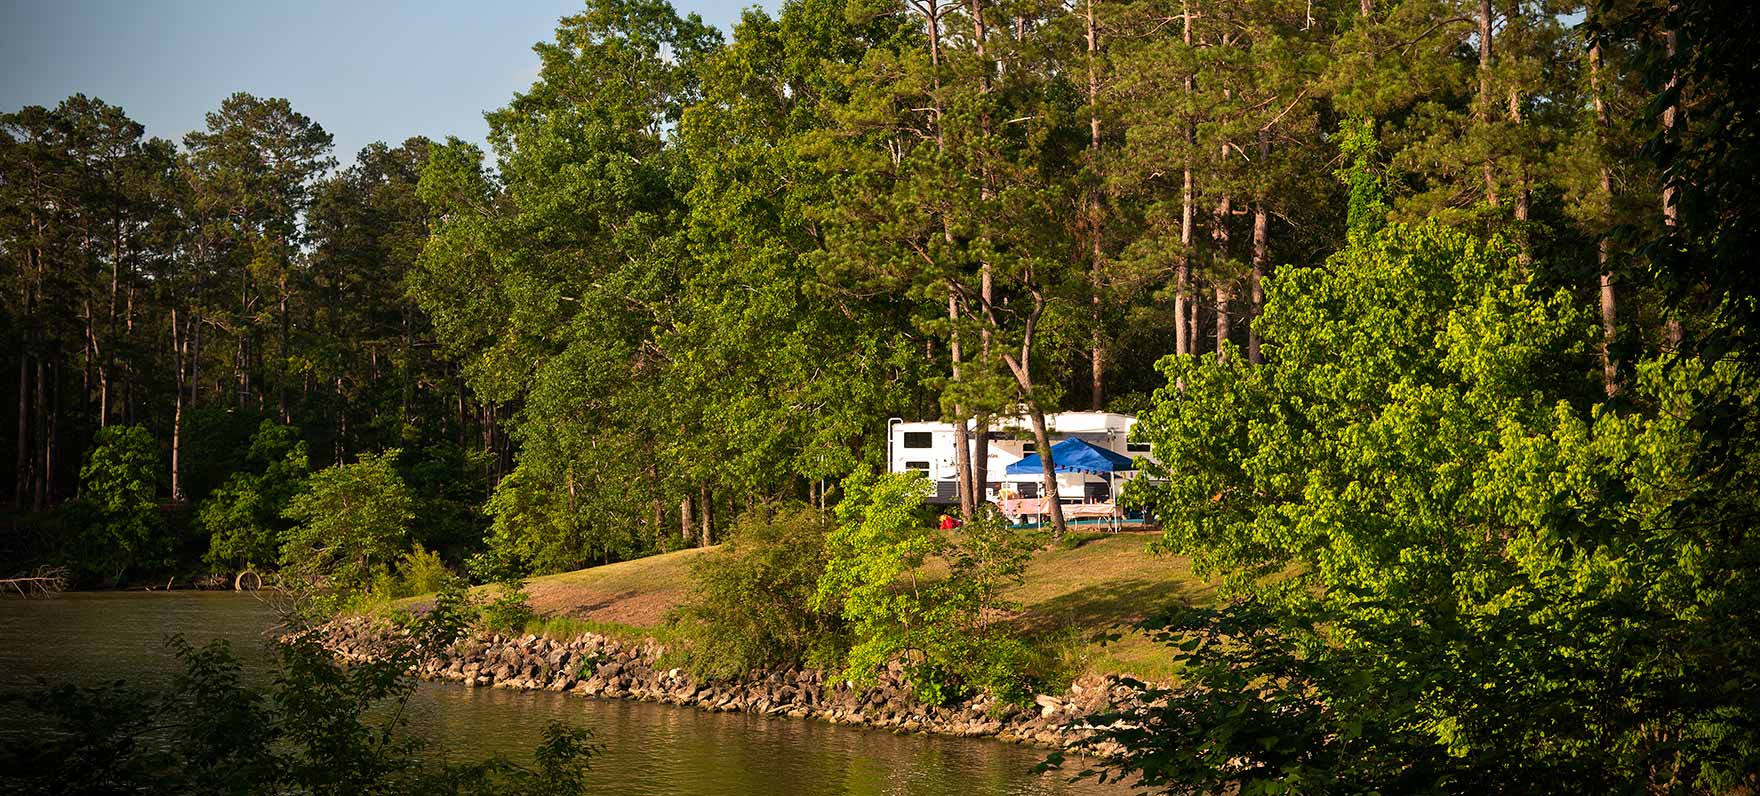 Finding a quiet campground is a great start to reducing noise